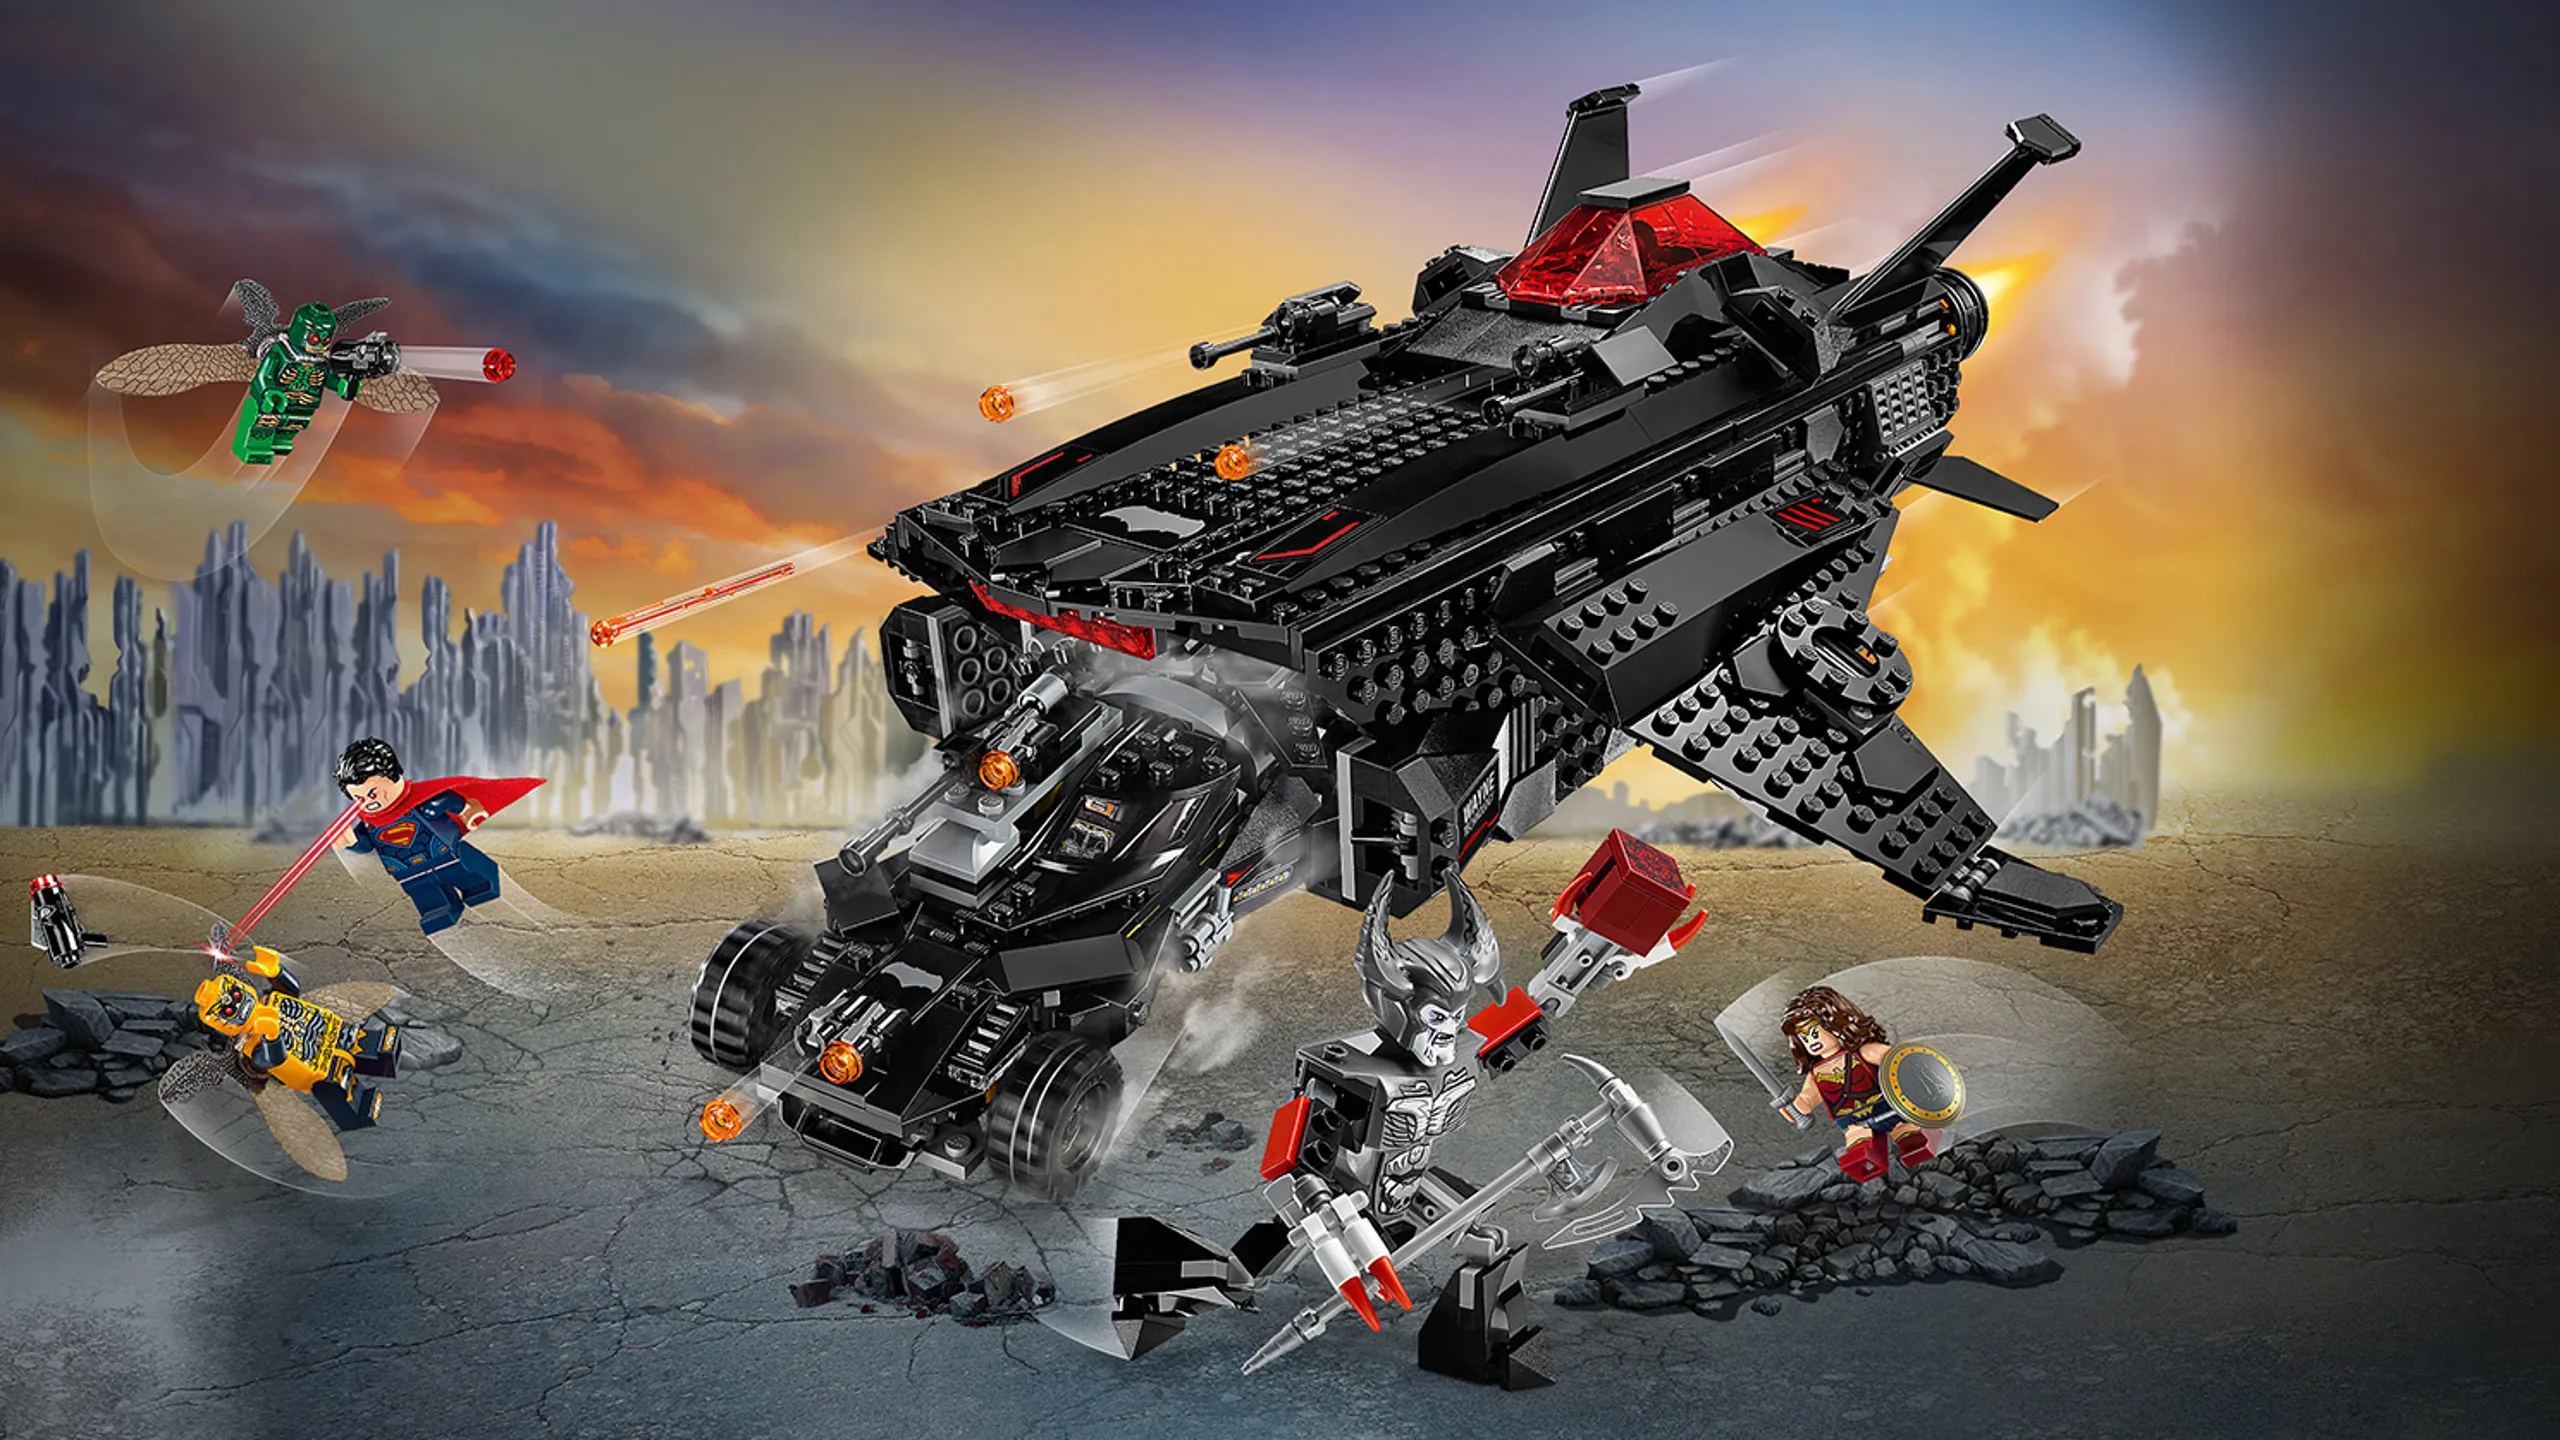 LEGO Super Heroes - 76087 Flying Fox: Batmobile Airlift Attack - Join the Justice League mission to defeat Steppenwolf and the Parademons with the Flying Fox and super-human powers.